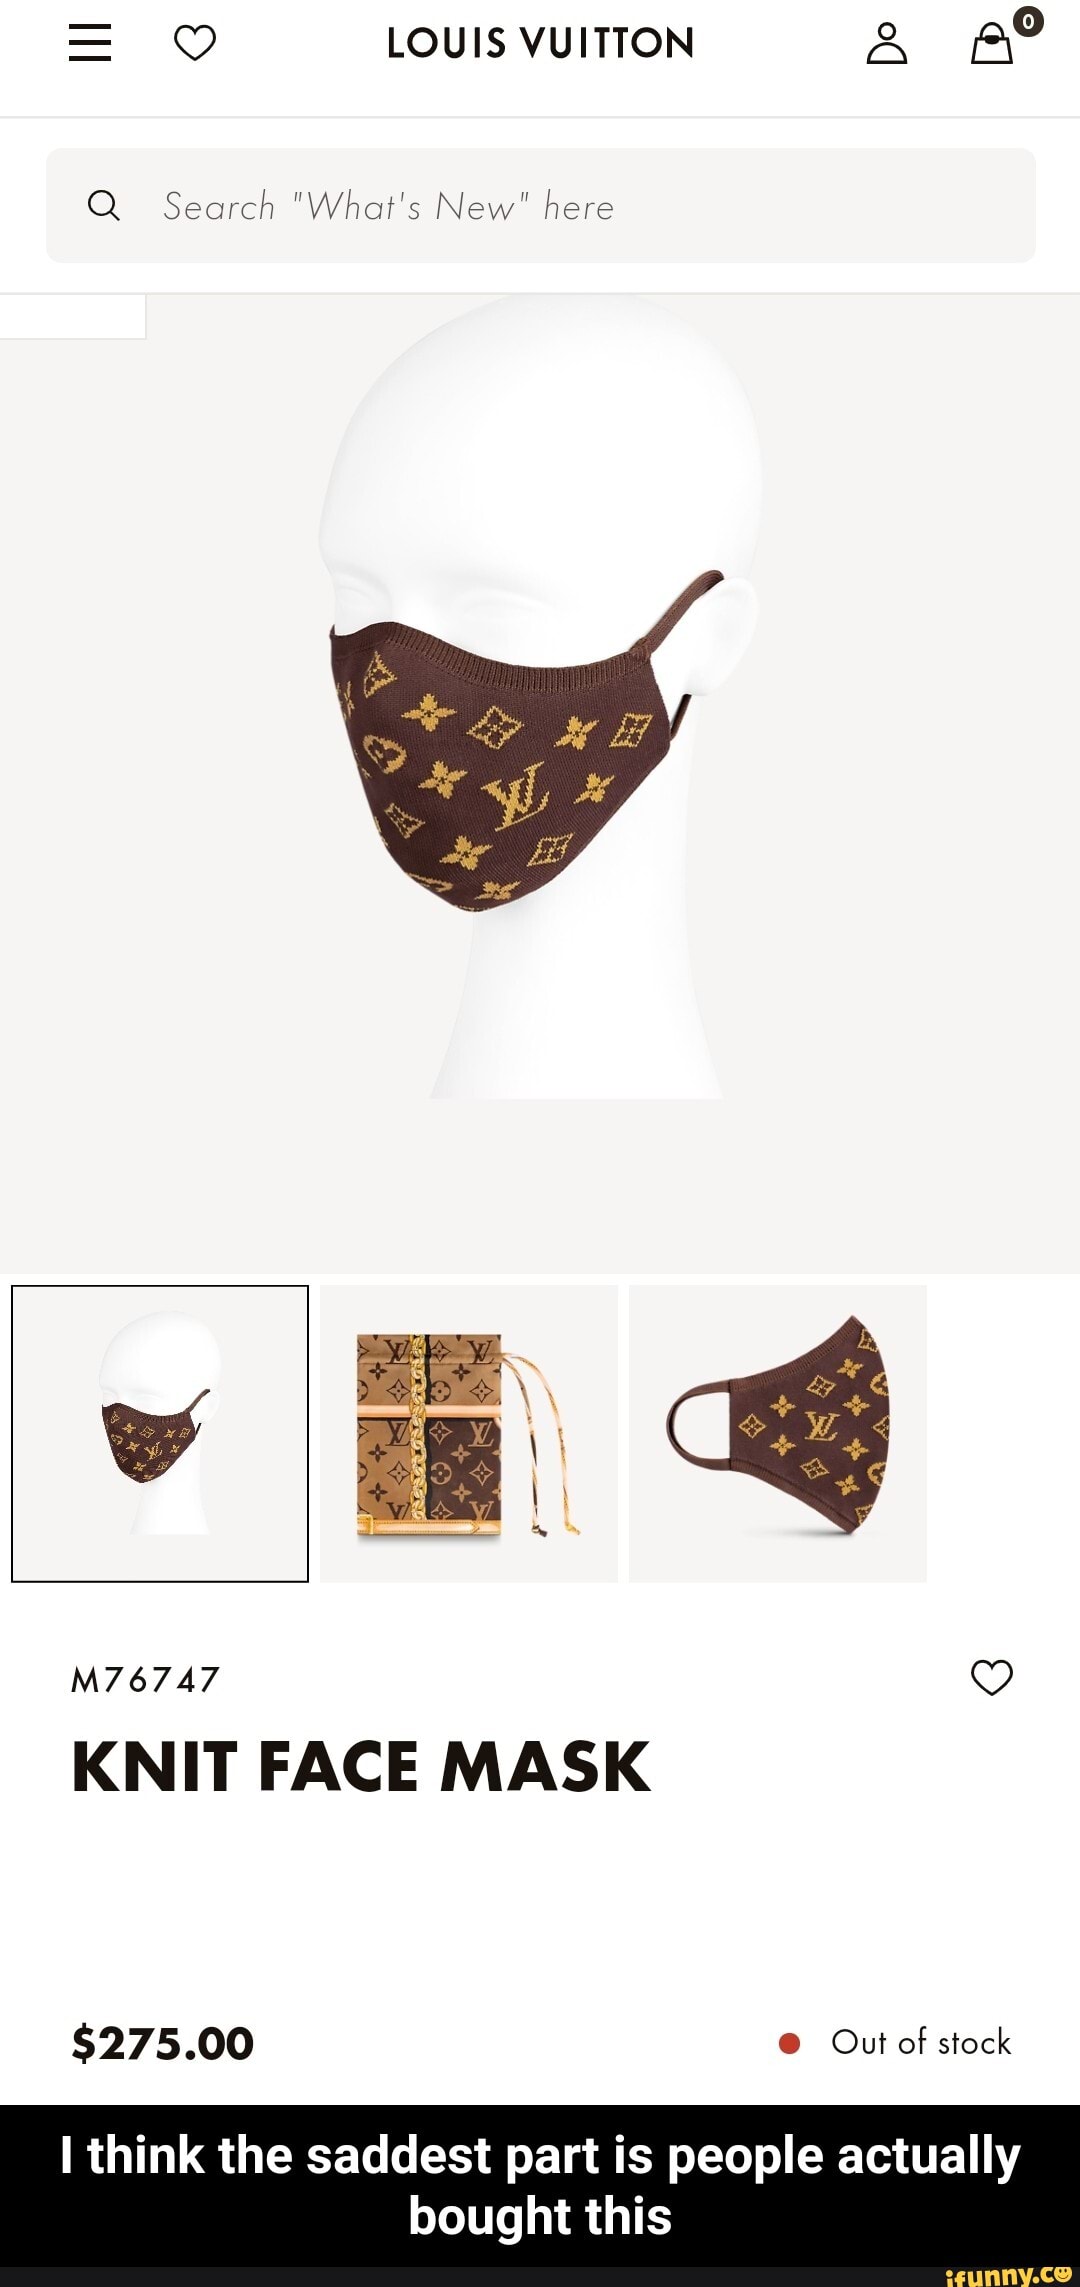 louis vuitton face with mask tattoo｜TikTok Search